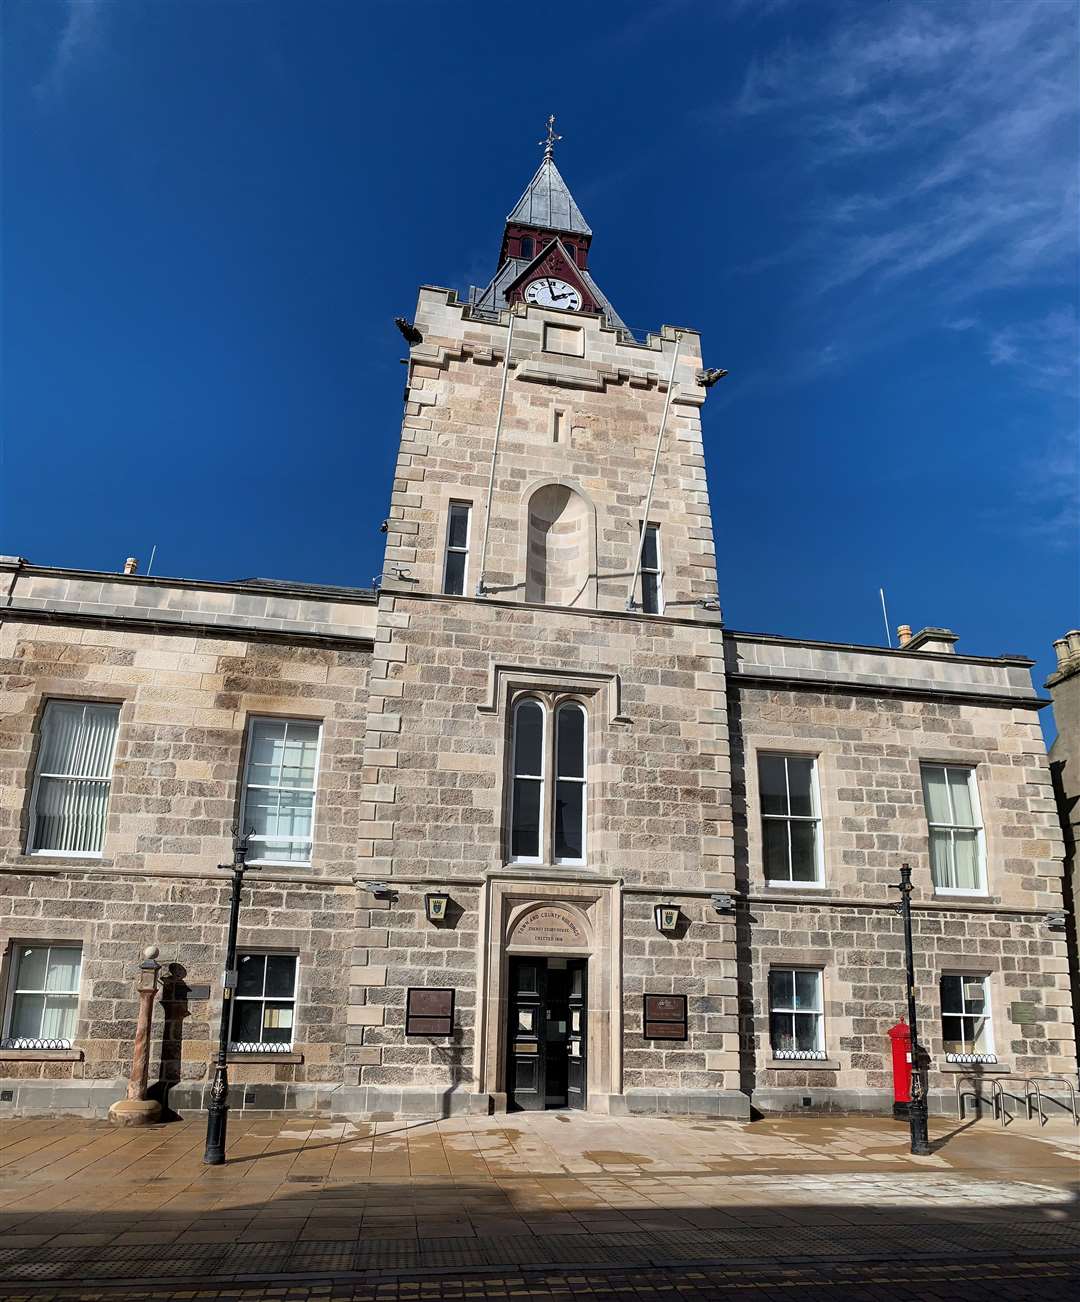 Works at Nairn Courthouse have now been completed.